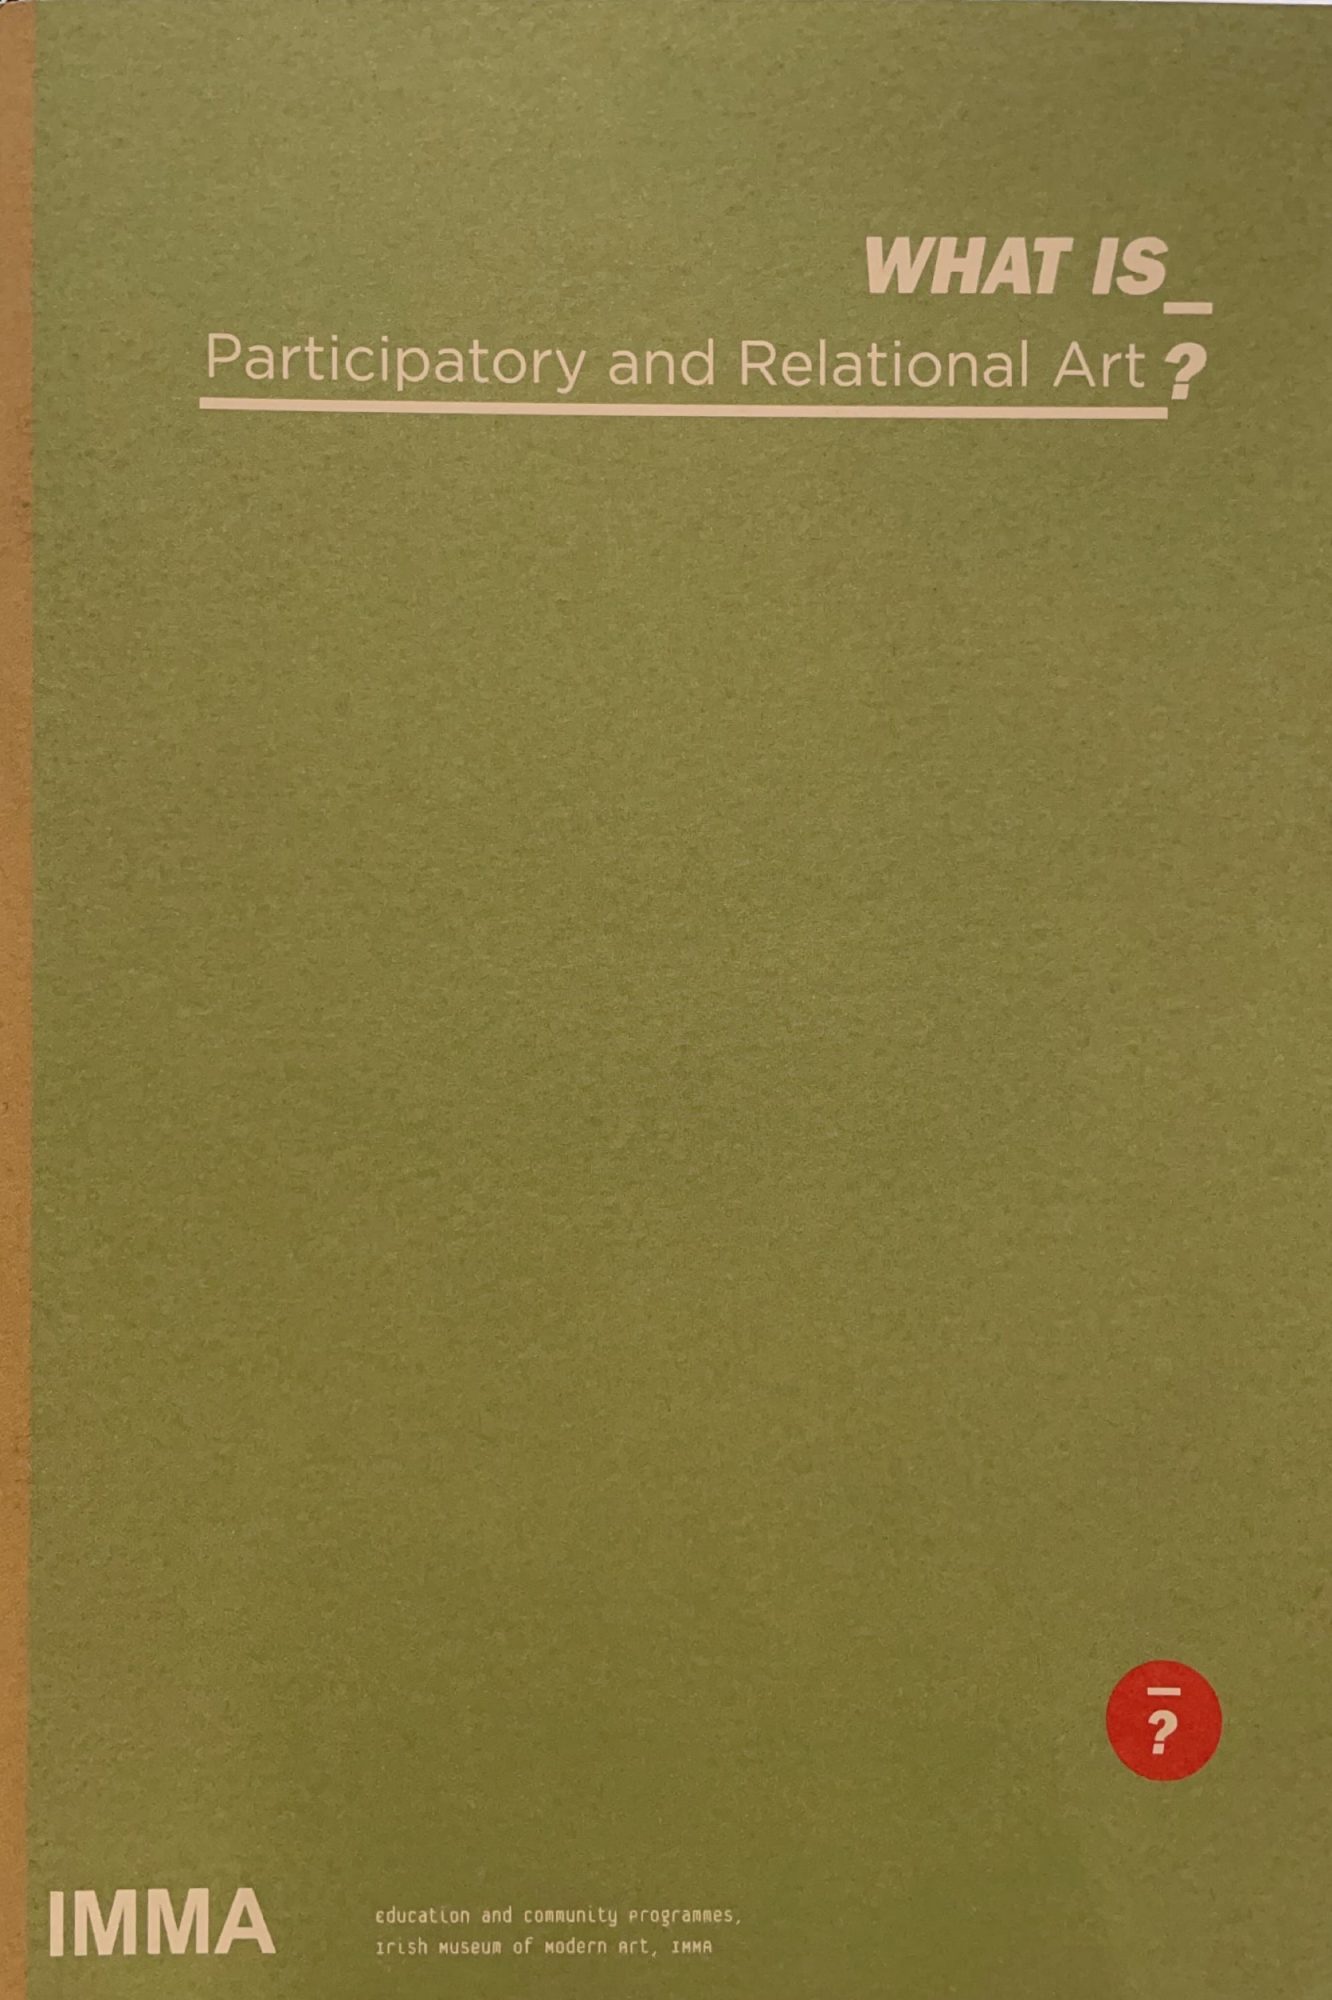 Participatory and Relational Art